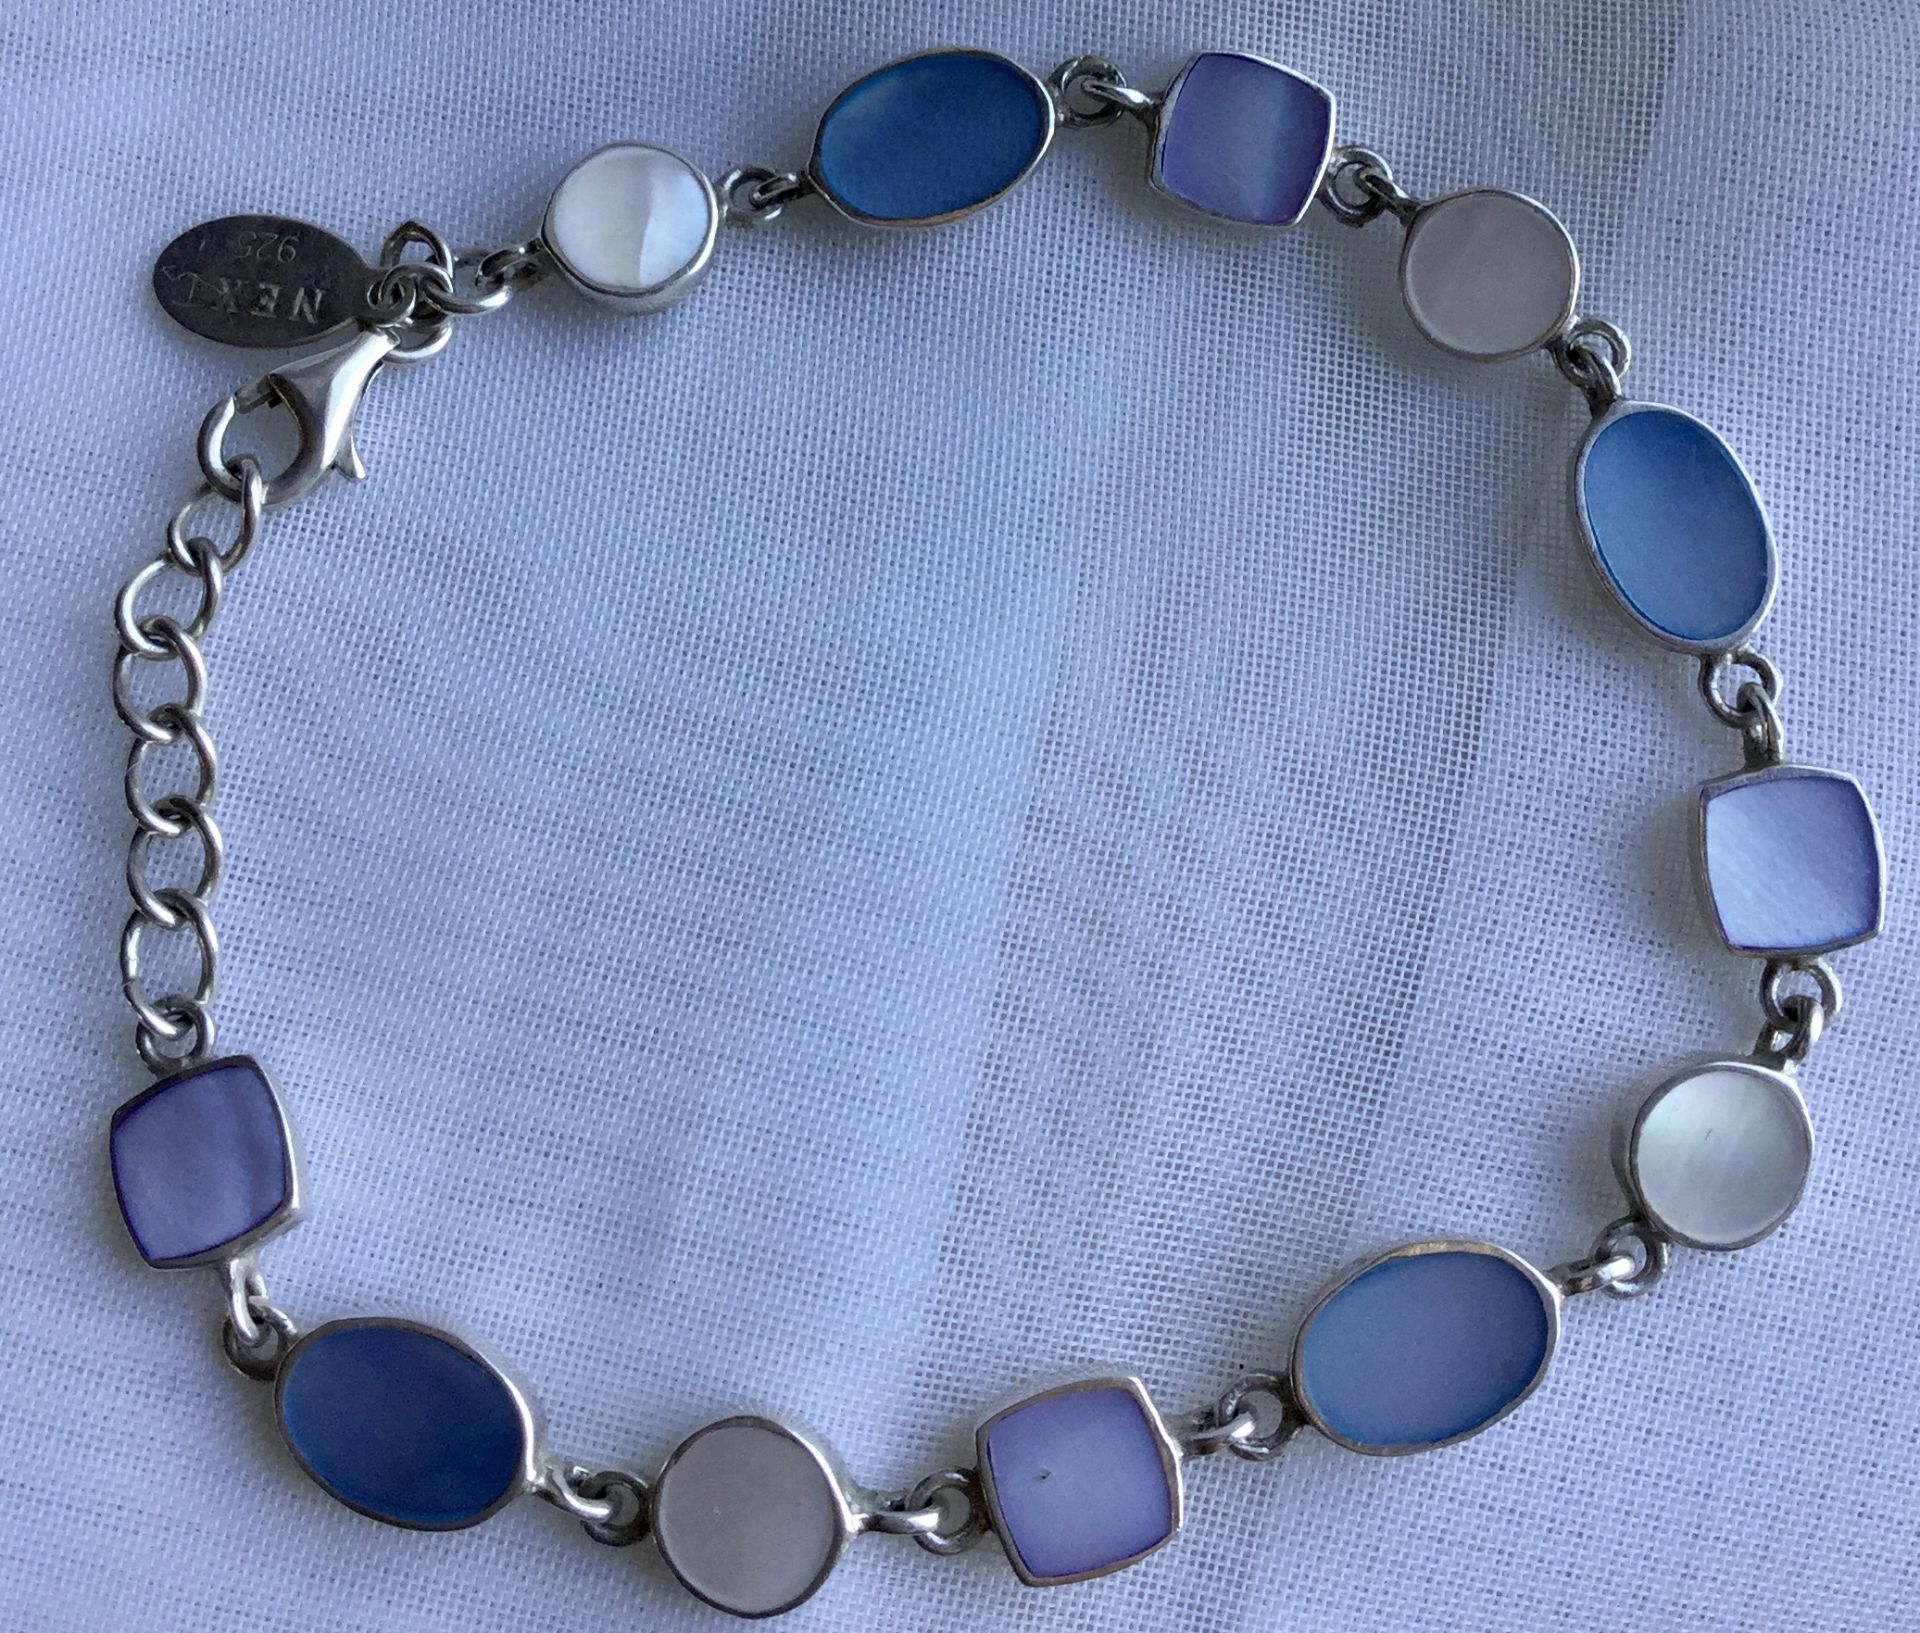 Silver Mother of Pearl Bracelet 7” - Image 4 of 8